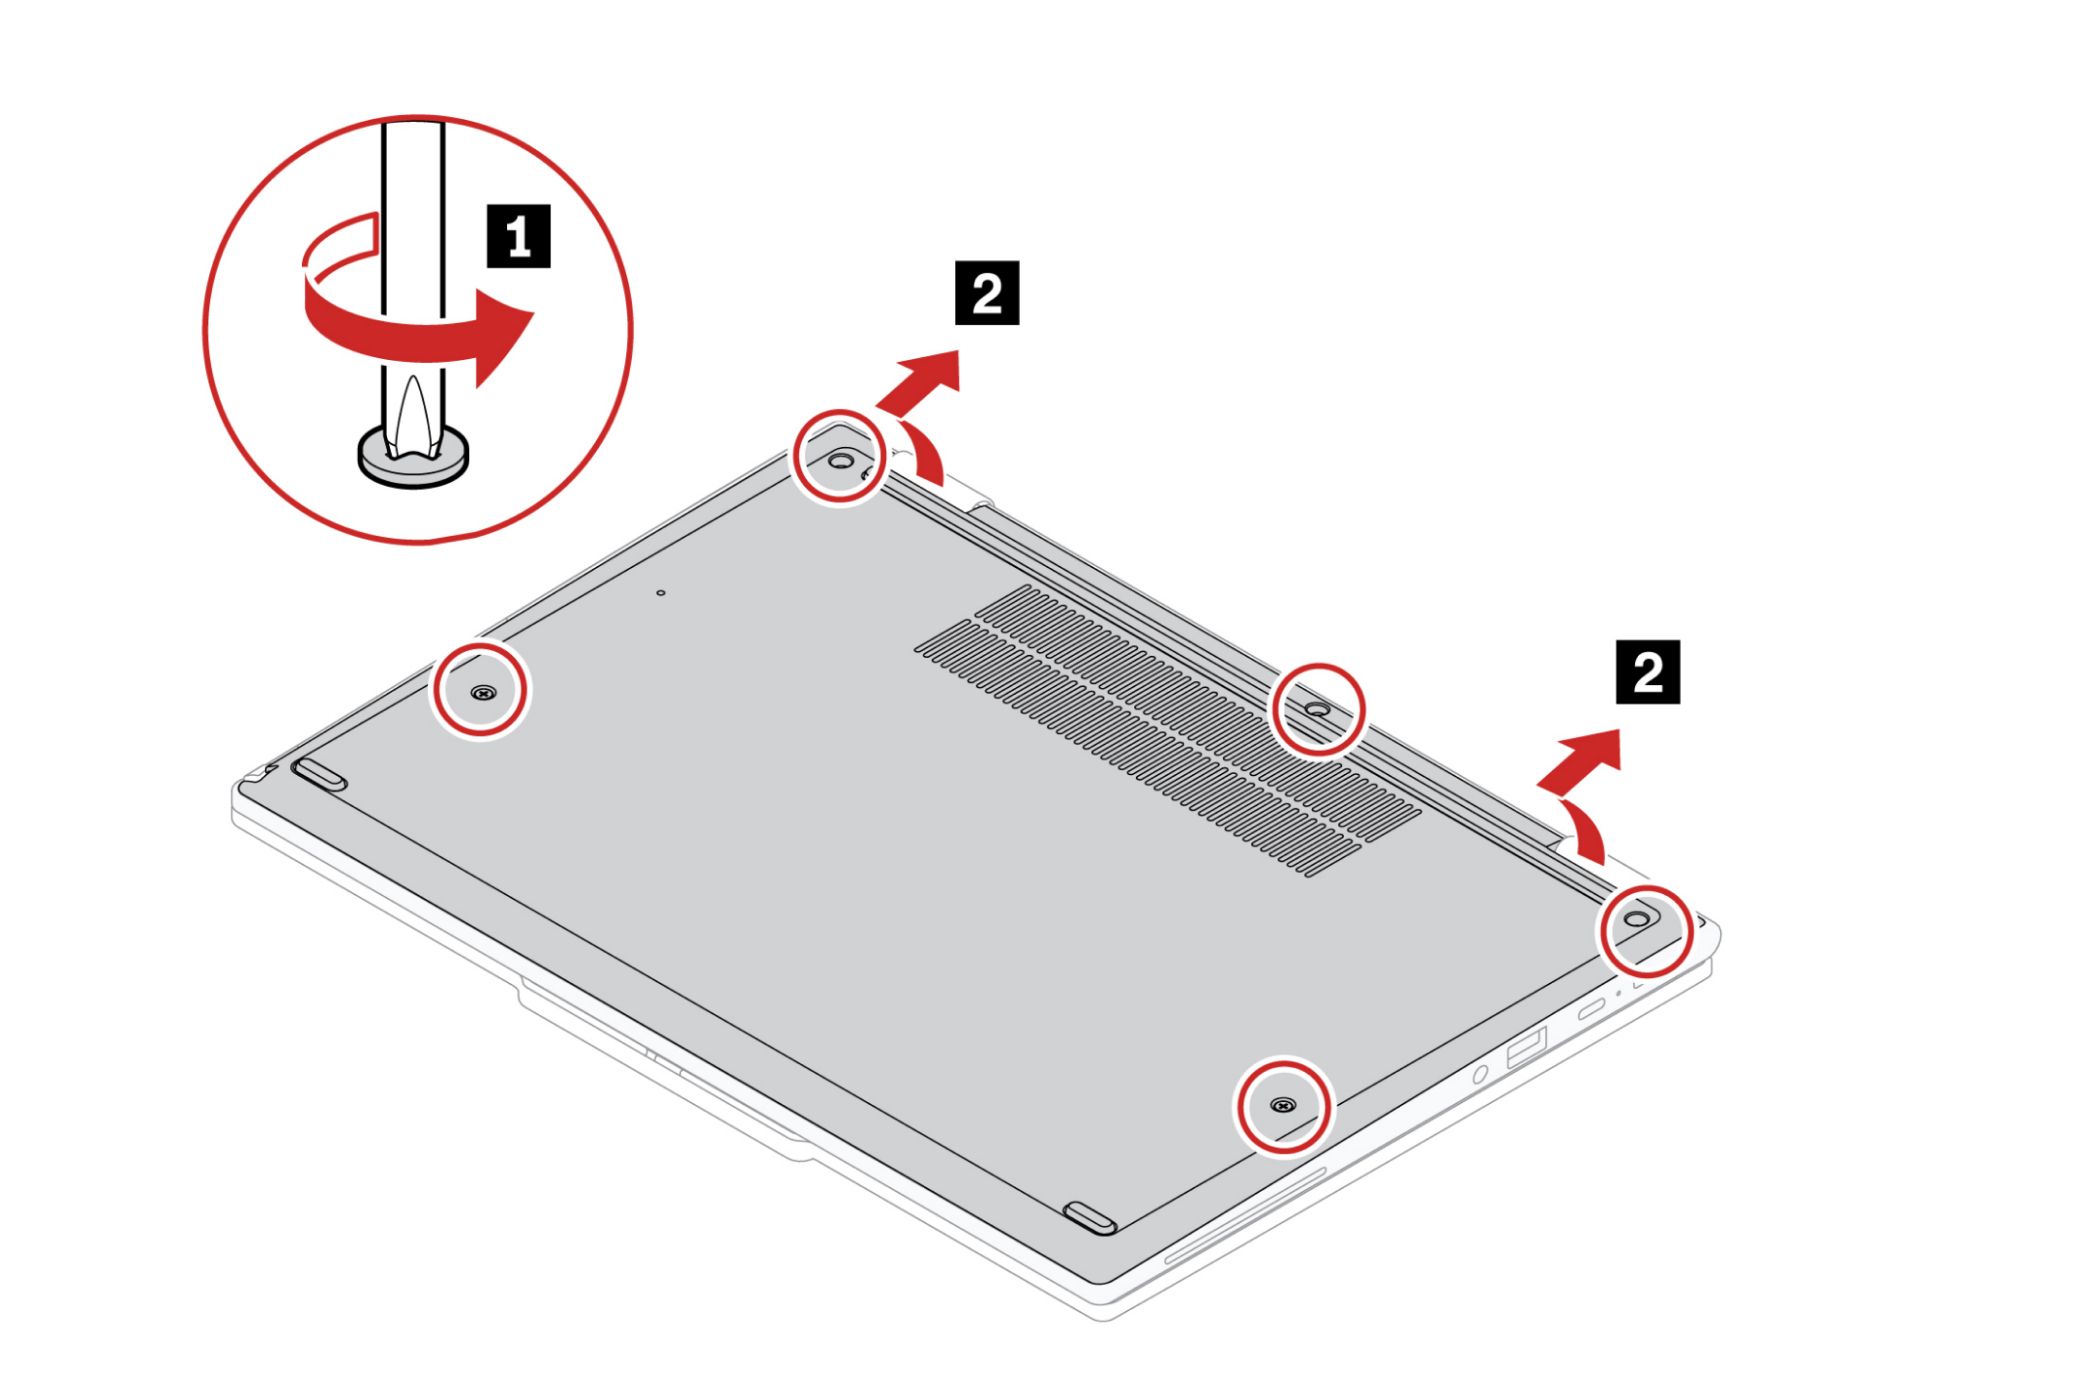 Remove the five screws holding the base cover in place using a Phillips screwdriver